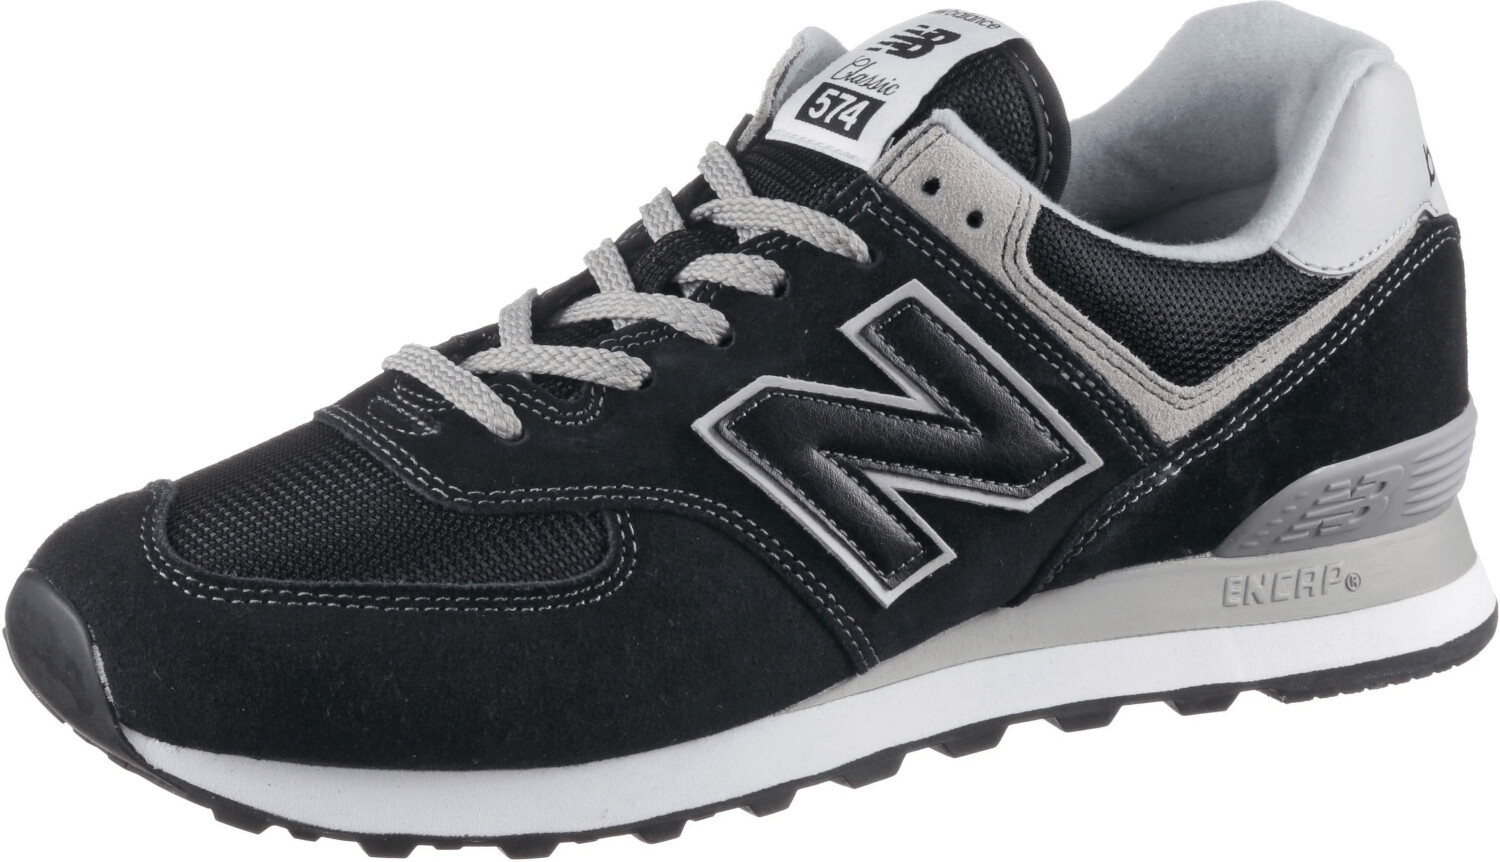 Buy New Balance 574 Core from £39.99 (Today) – Best Deals on